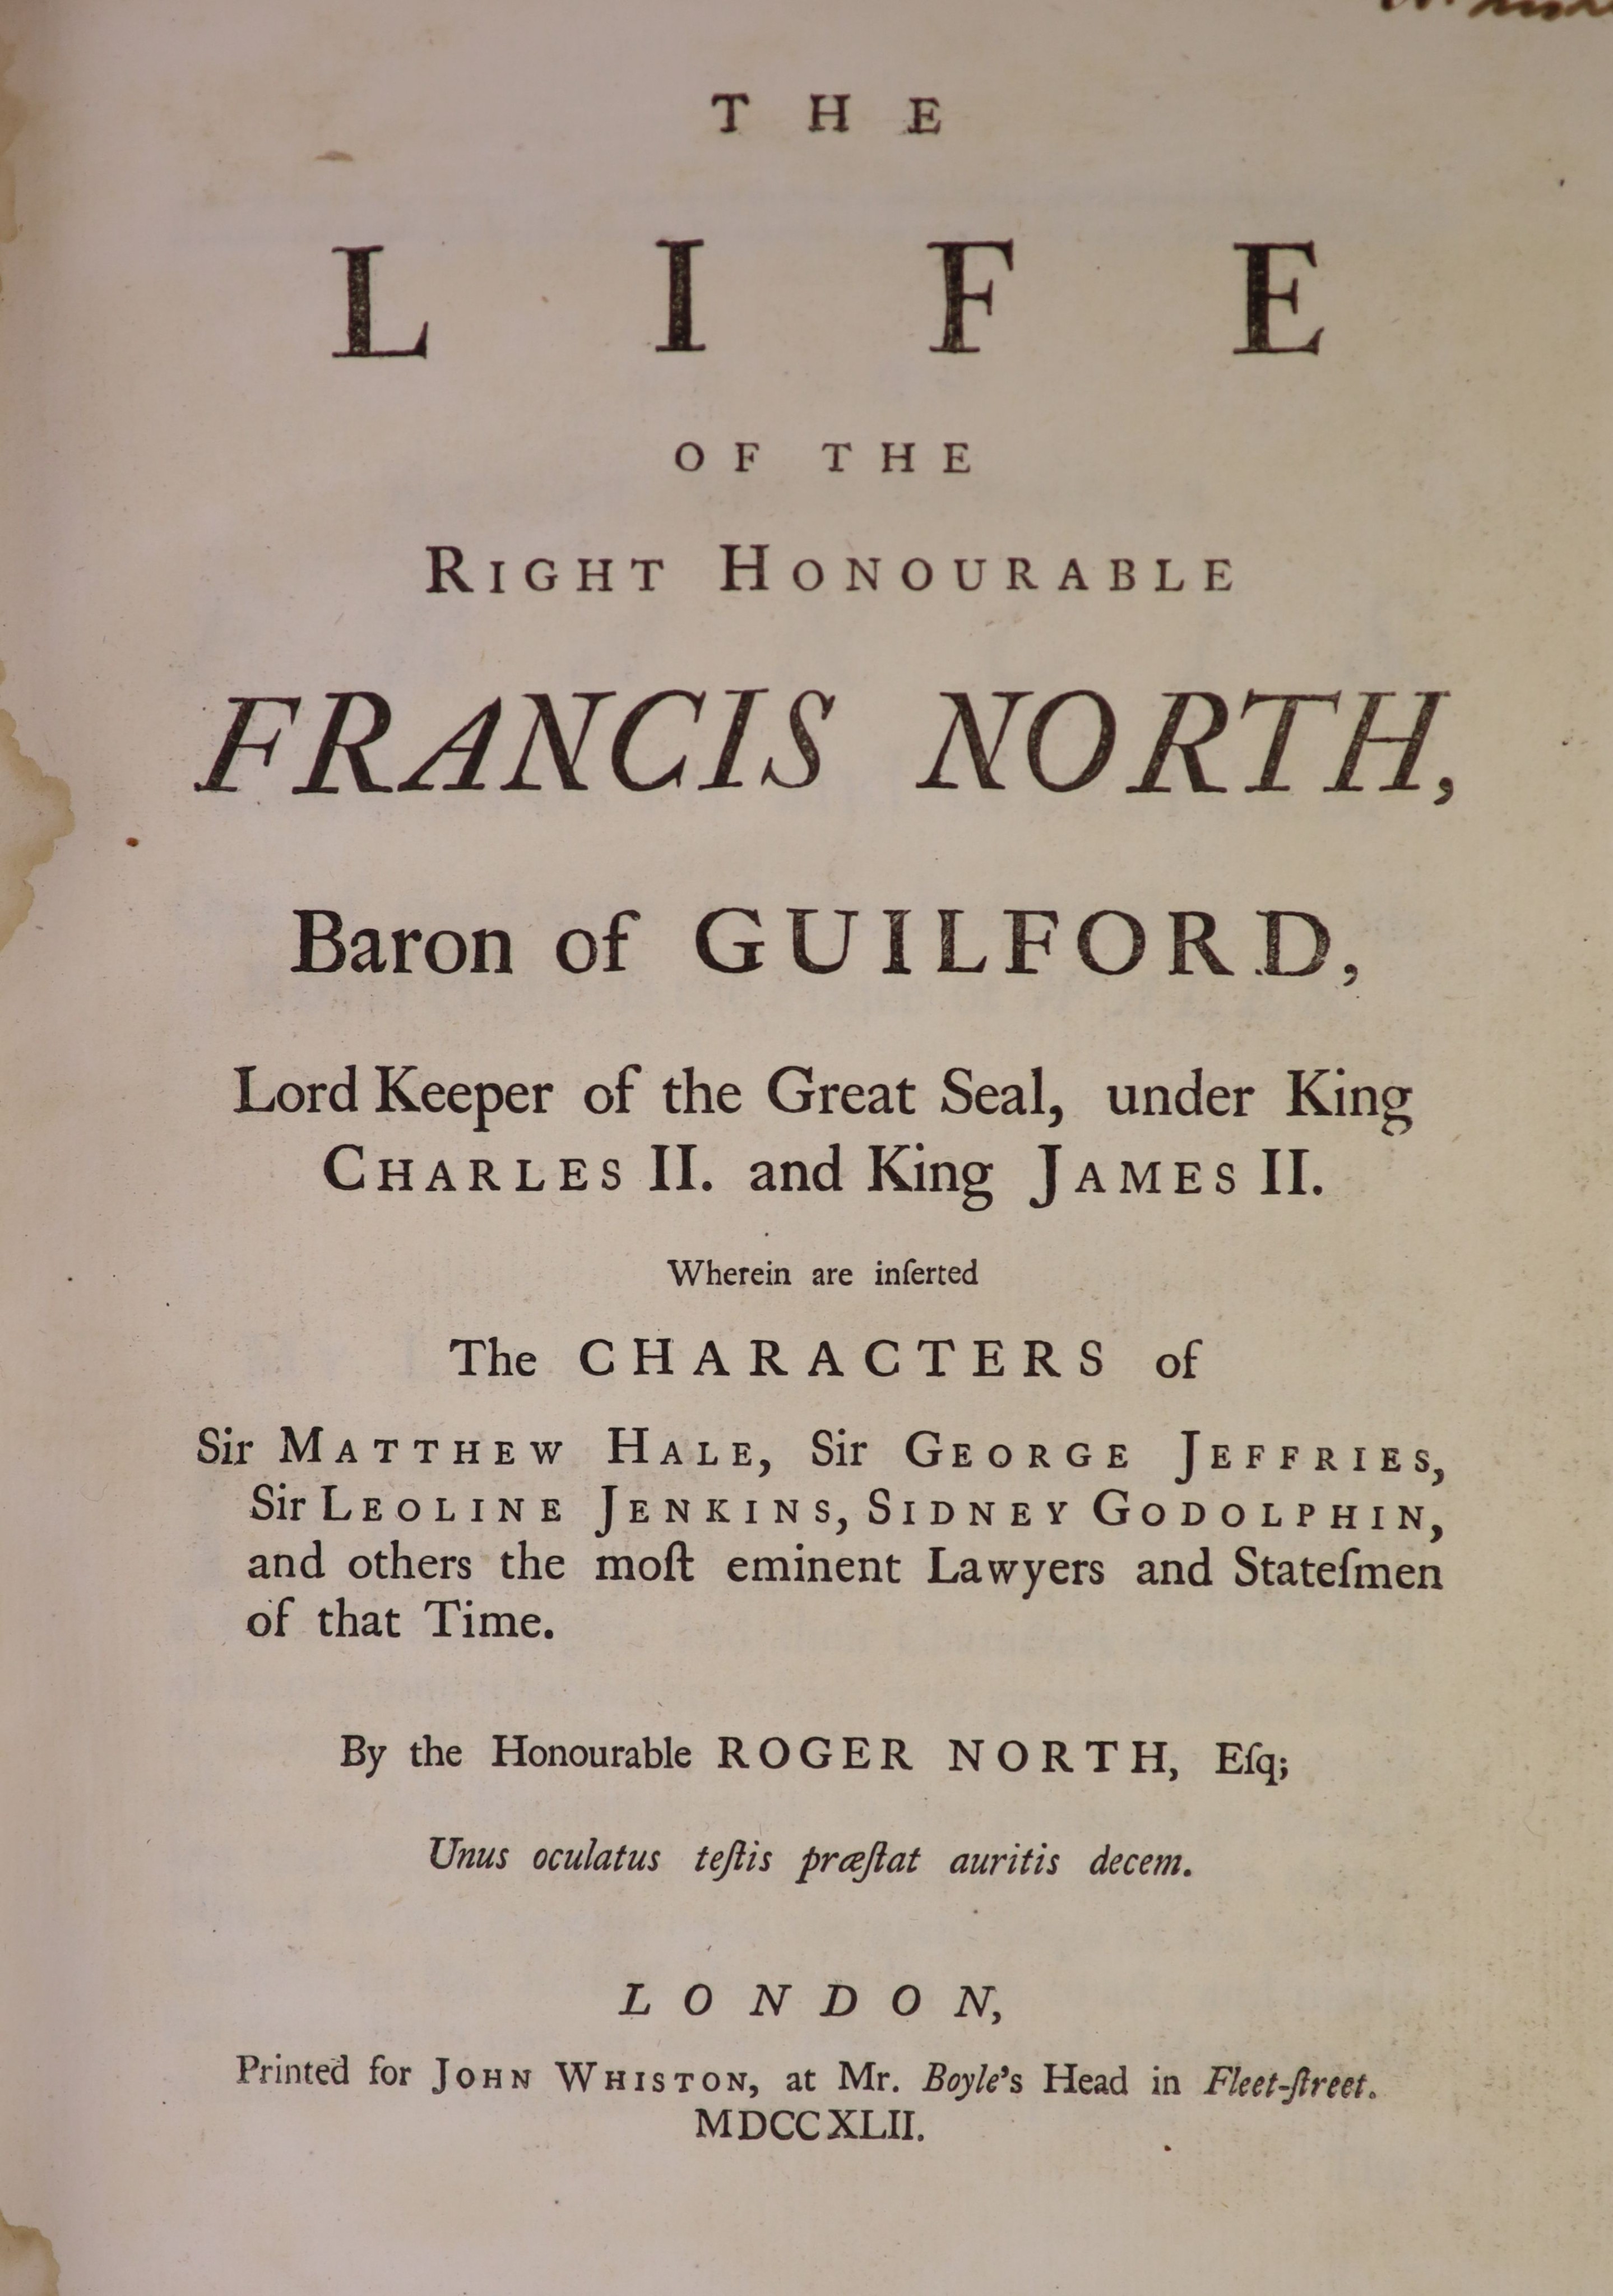 North, Hon. Roger - The Life of the Right Honourable Francis North, Baron of Guilford…complete with engraved frontispiece. Restored gilt ruled marbled calf, gilt panelled spine with decorations and morocco label. Sprinkl